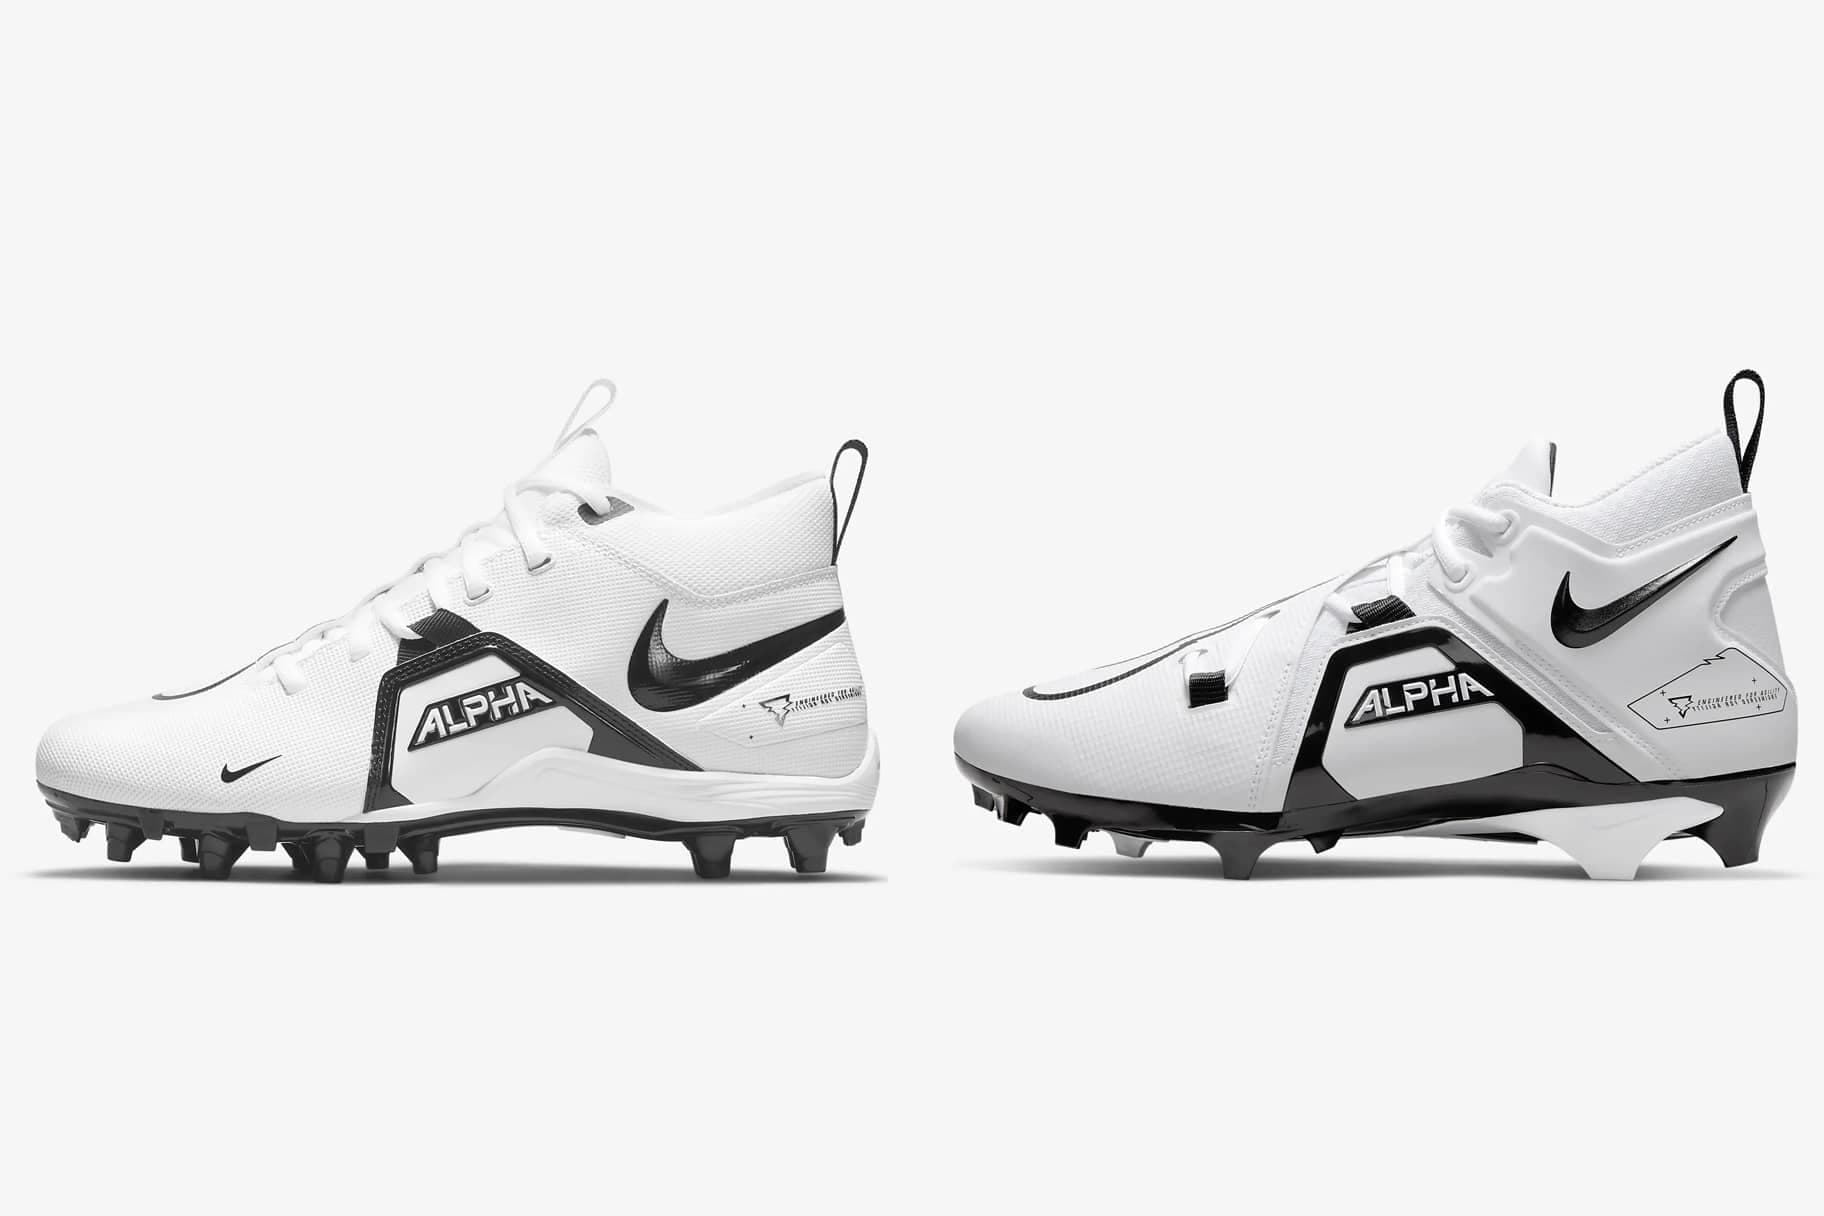 nike receiver cleats